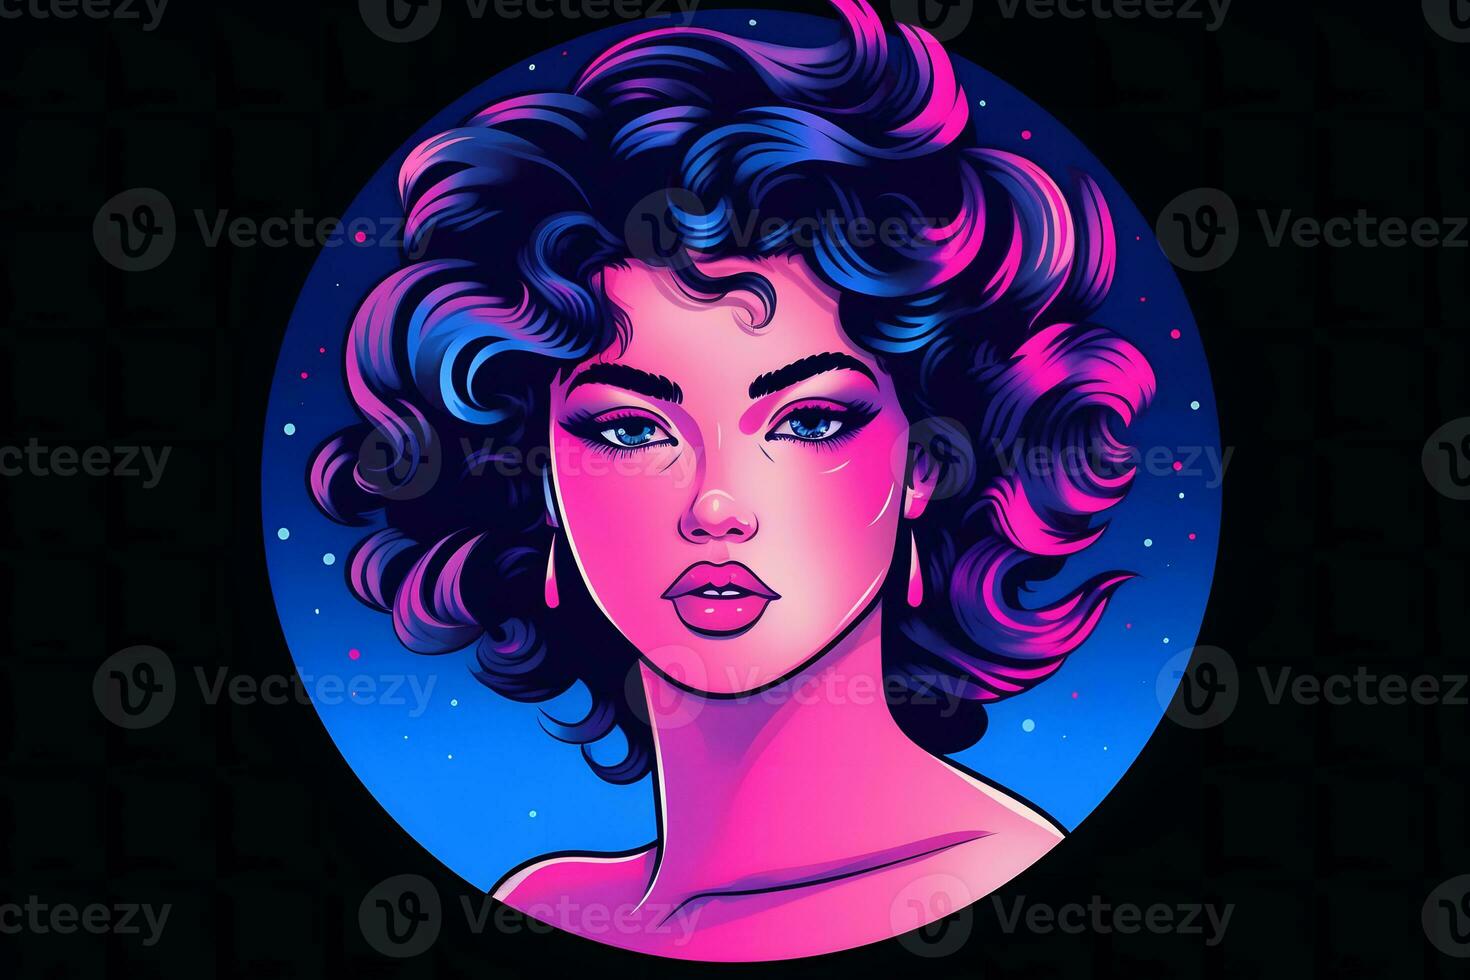 Retrowave synthwave portrait of a young woman vaporwave. 80s sci-fi futuristic fashion poster style. Neural network AI generated photo